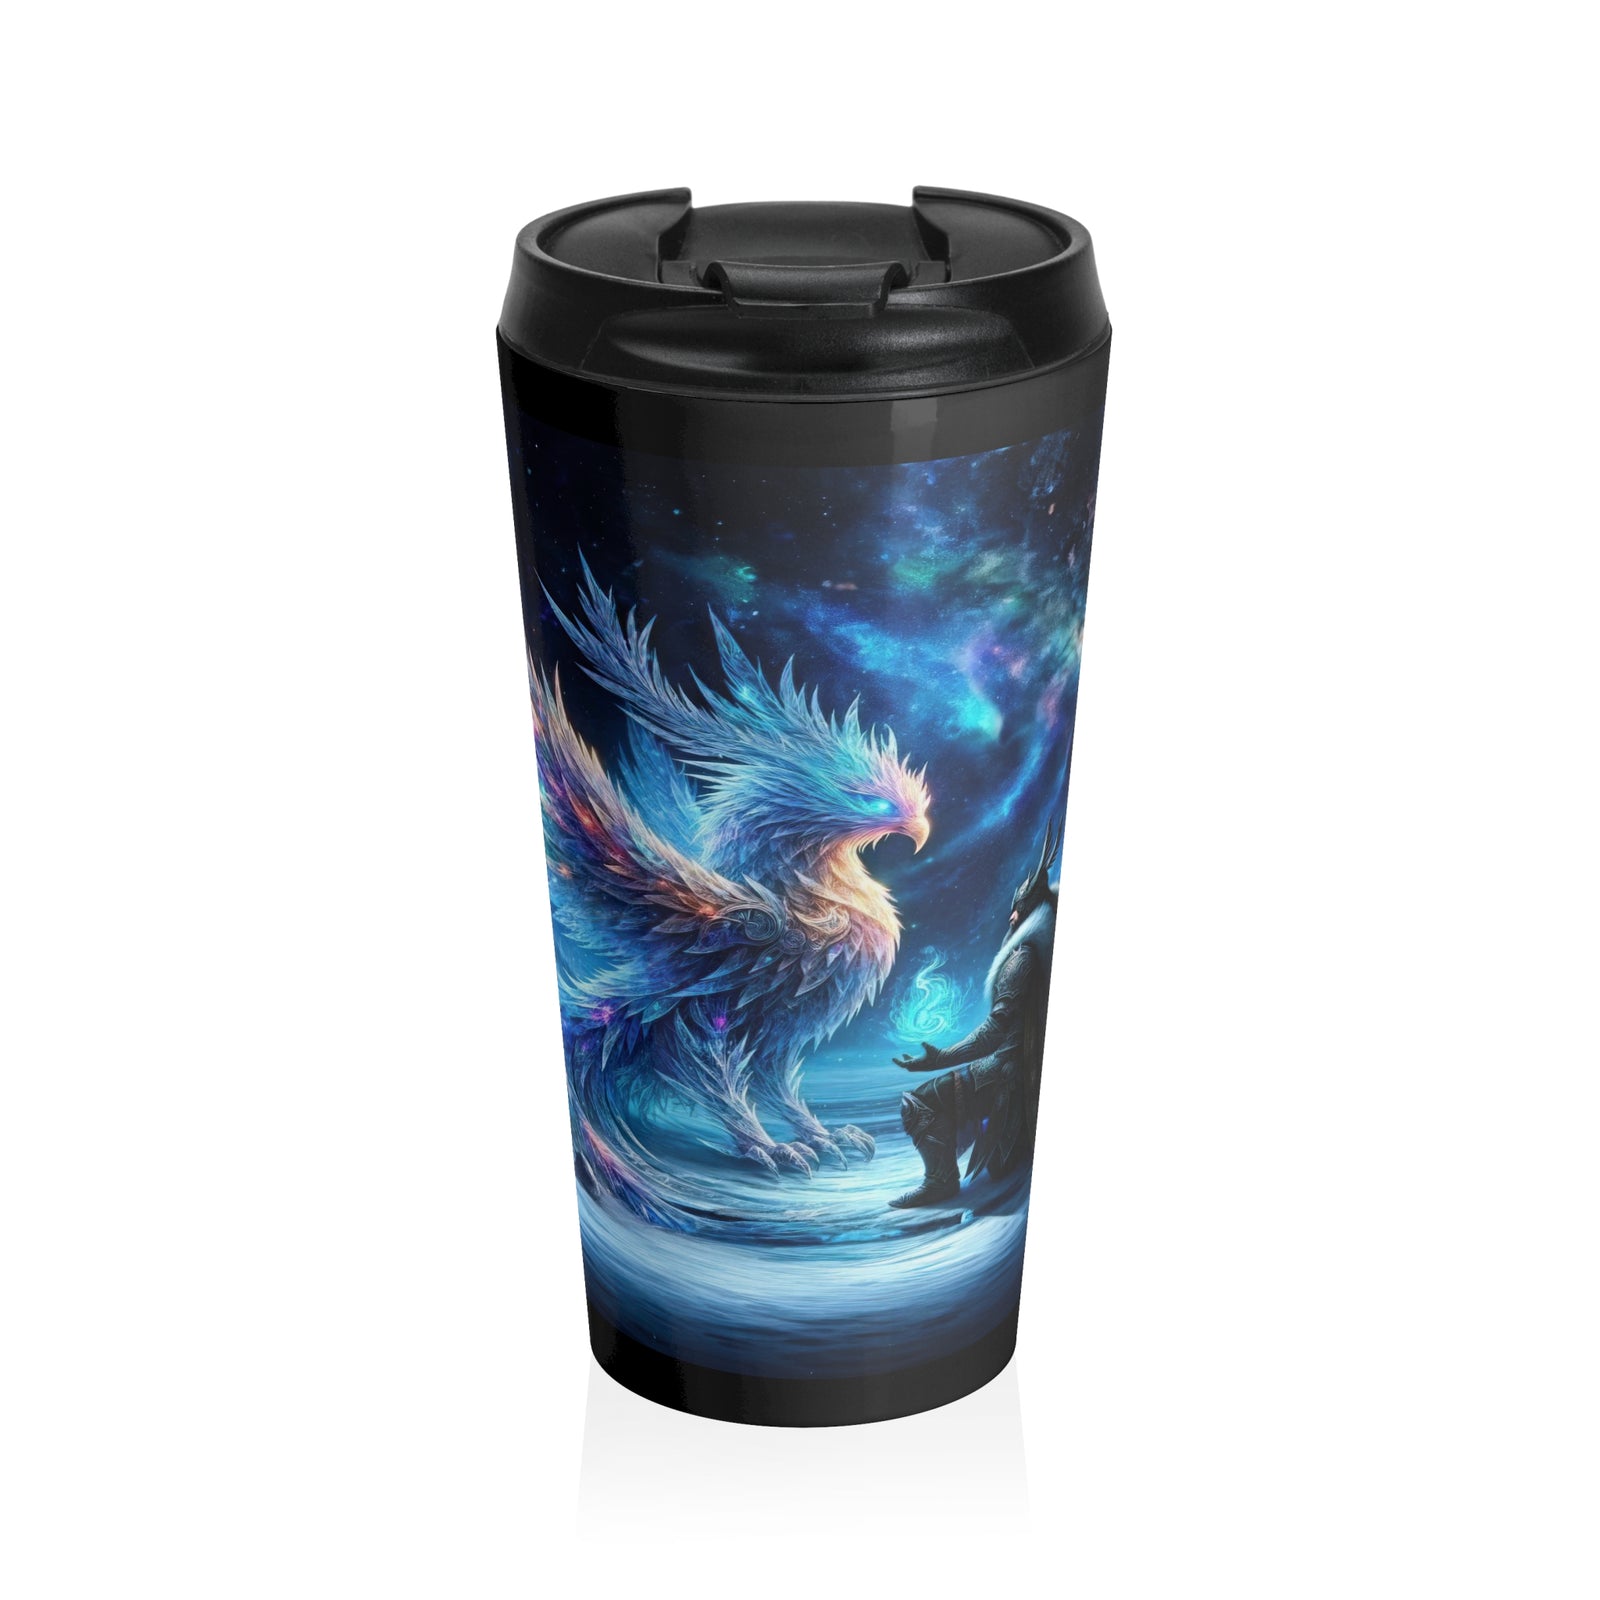 Galactic Frost Sovereign and the Cosmic Phoenix Travel Mug